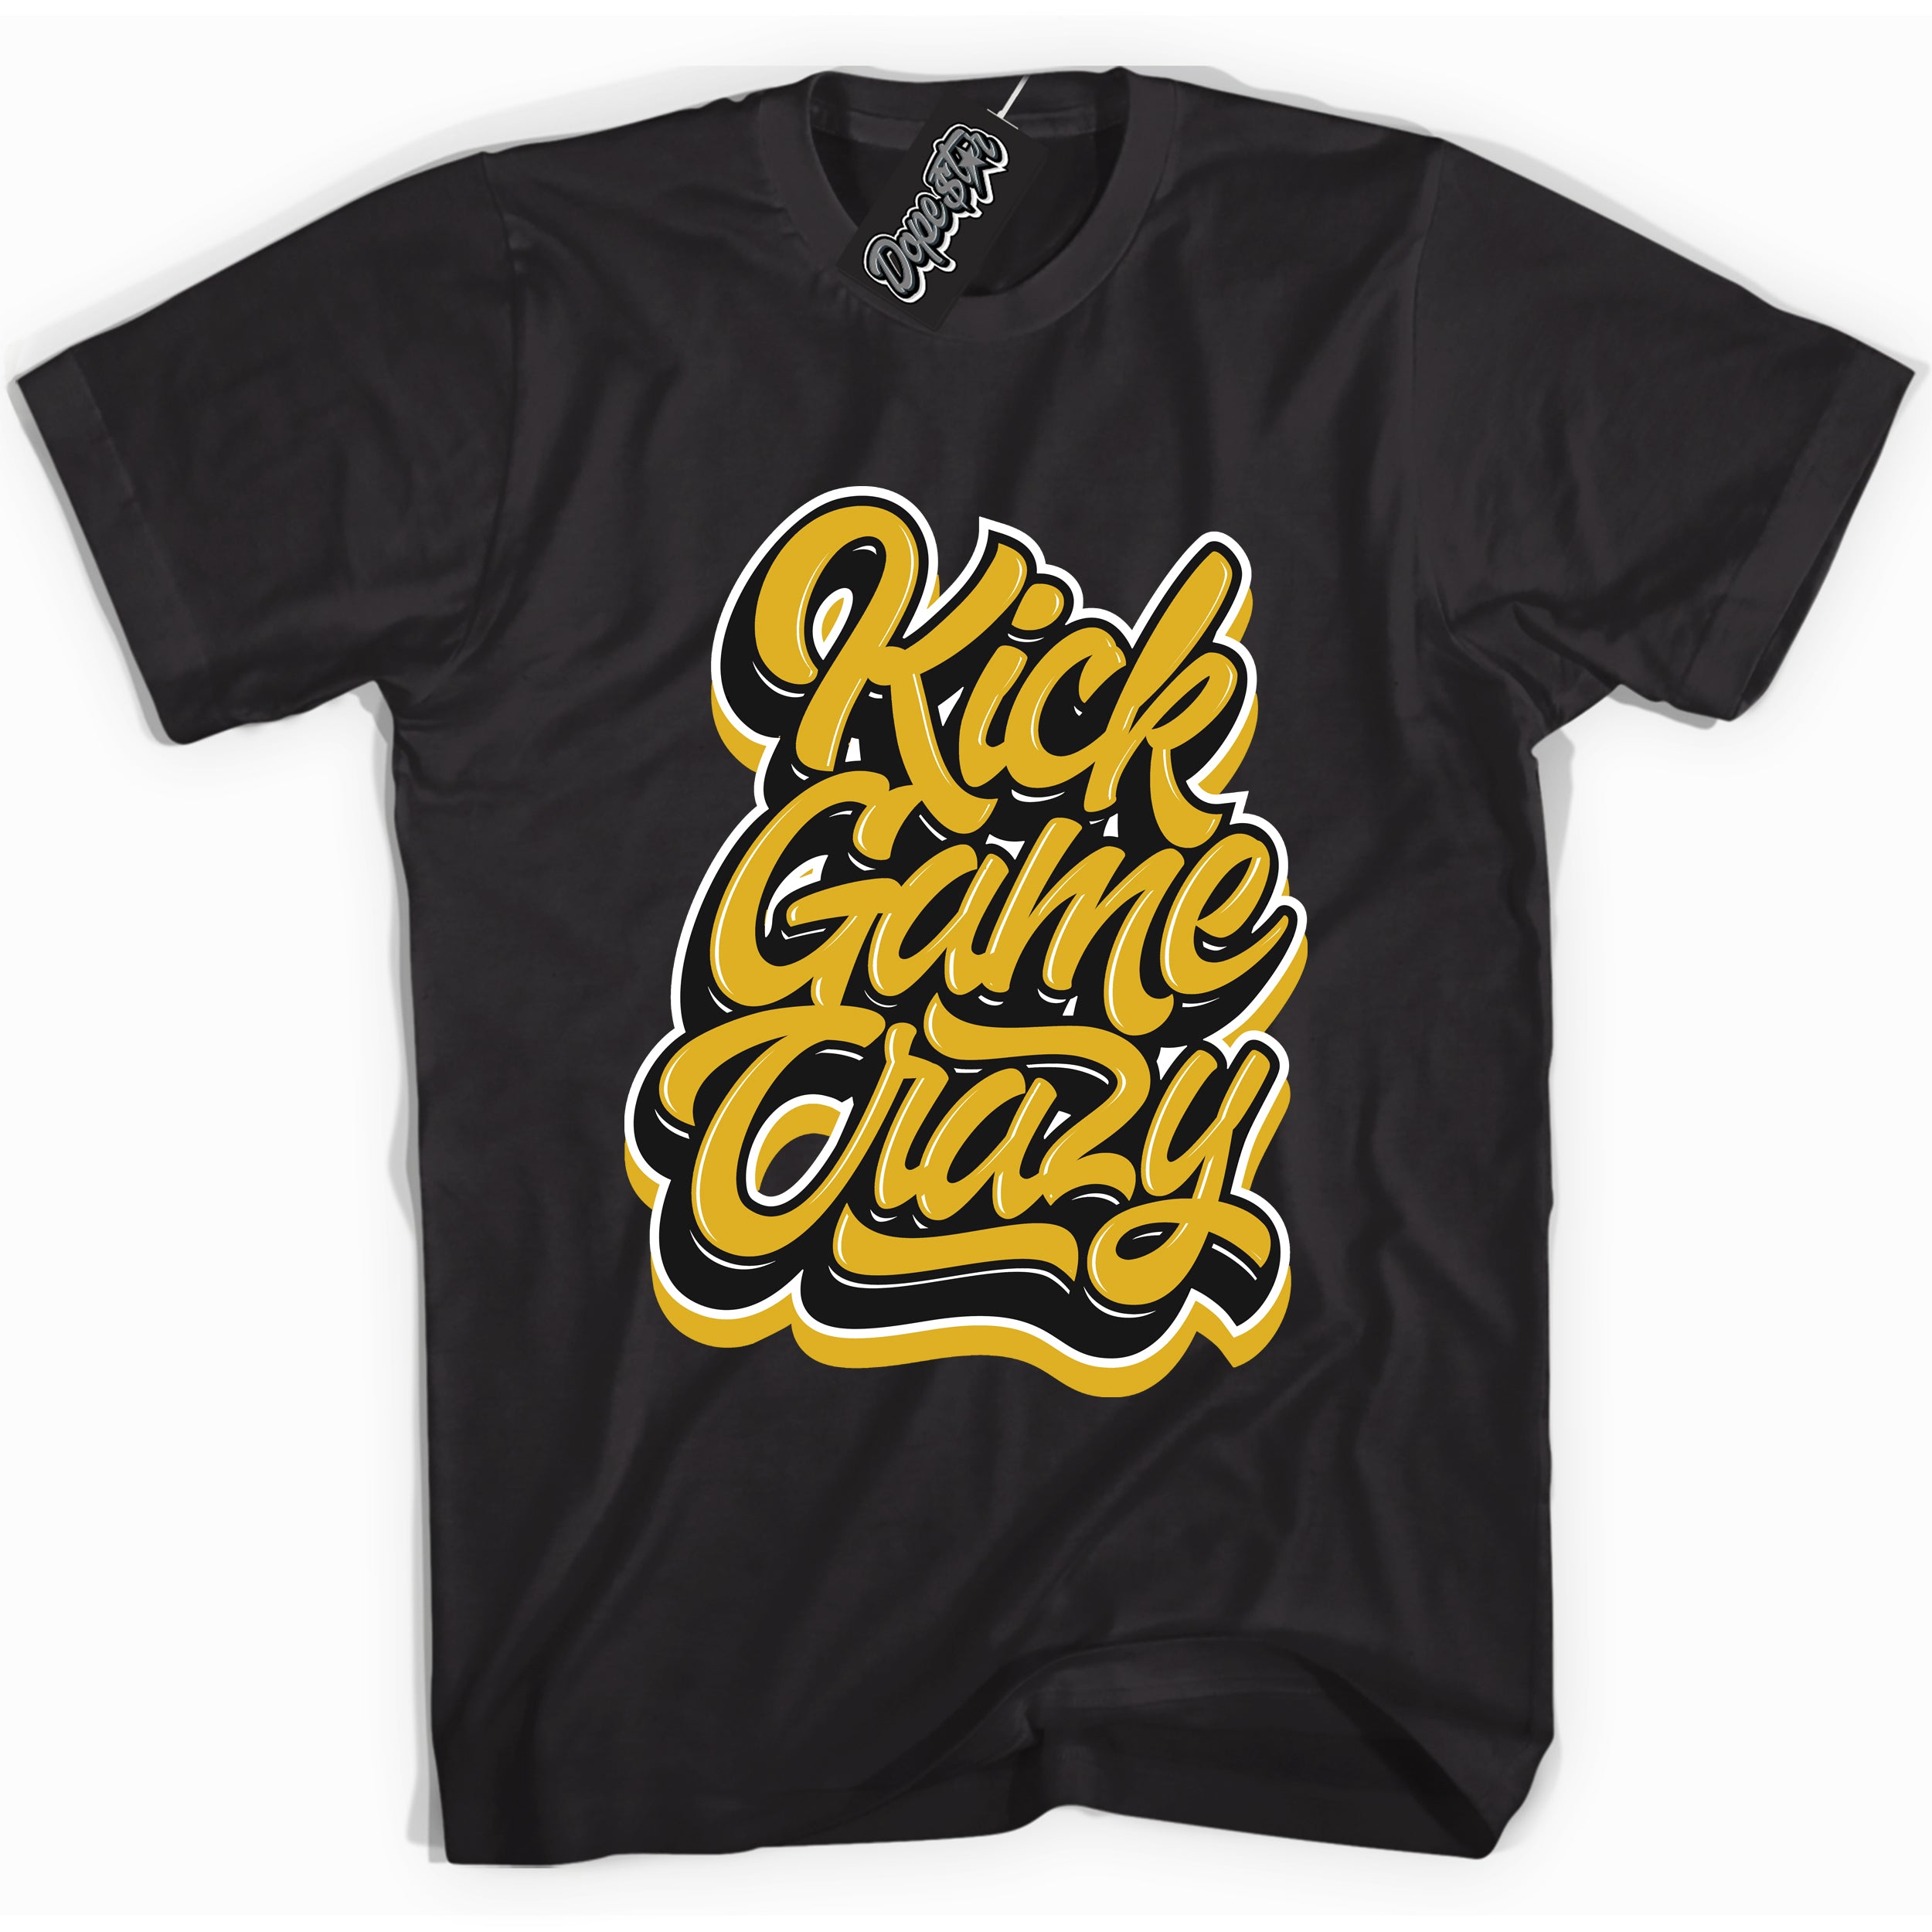 Cool Black Shirt with “ Kick Game Crazy ” design that perfectly matches Yellow Ochre 6s Sneakers.